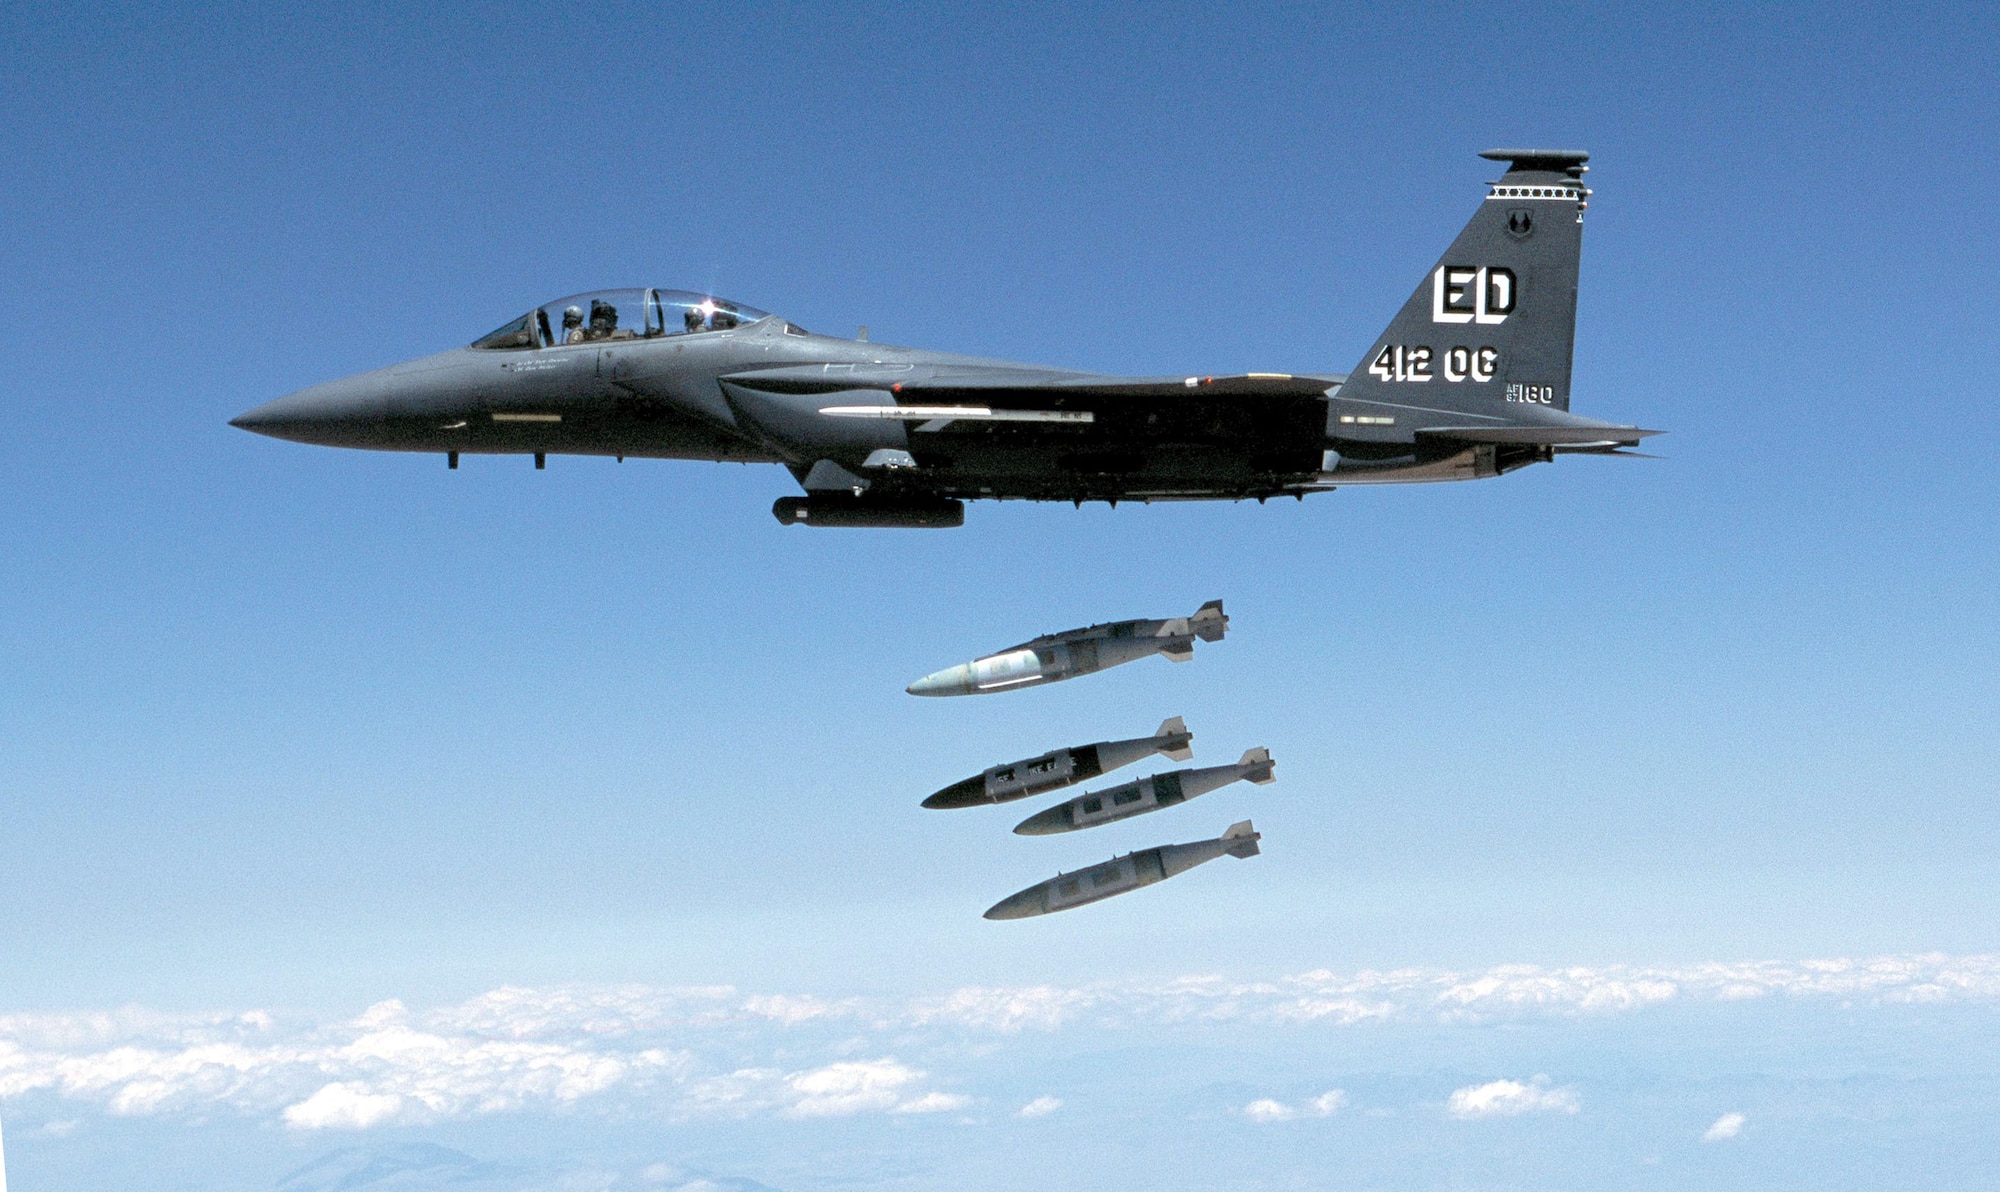 Four 2,000-pound Joint Direct Attack Munitions are released from an F-15E during a developmental test at Edwards Air Force Base in 2002. JDAM is known as the warfighter's weapon of choice because of its accuracy, reliability and low cost. More than 15,000 JDAMs have been used in combat since its debut in 1999 during Operation Allied Force. (Courtesy Photo)